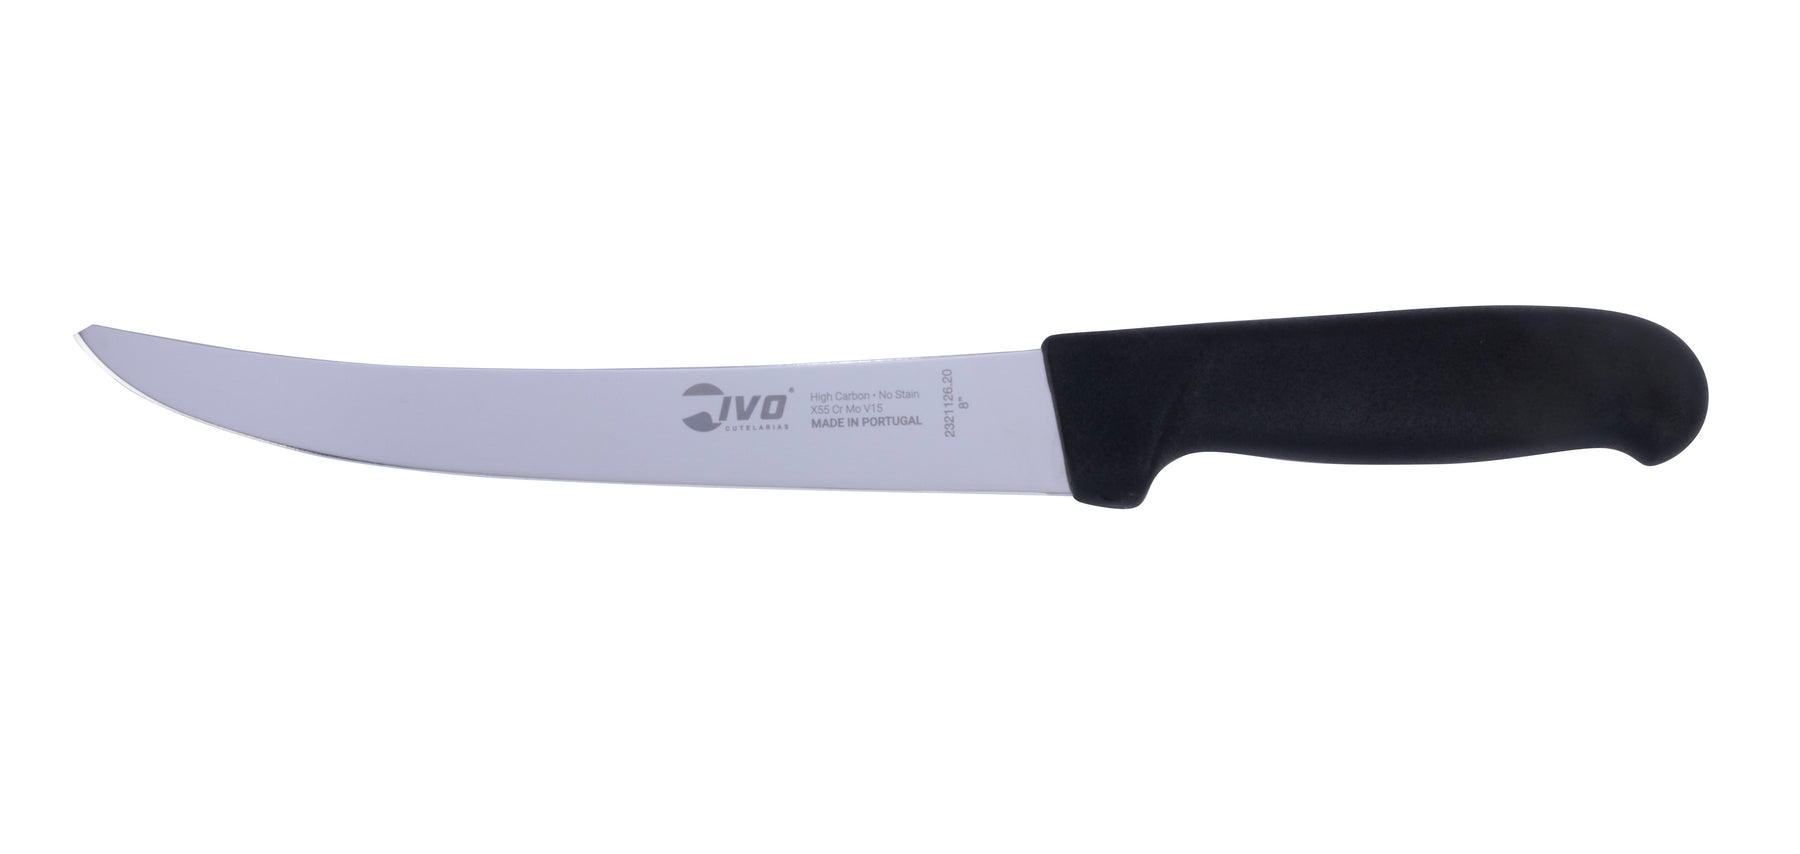 IVO Ergocut 8" Black Curved Butcher Knife with Safety Tip